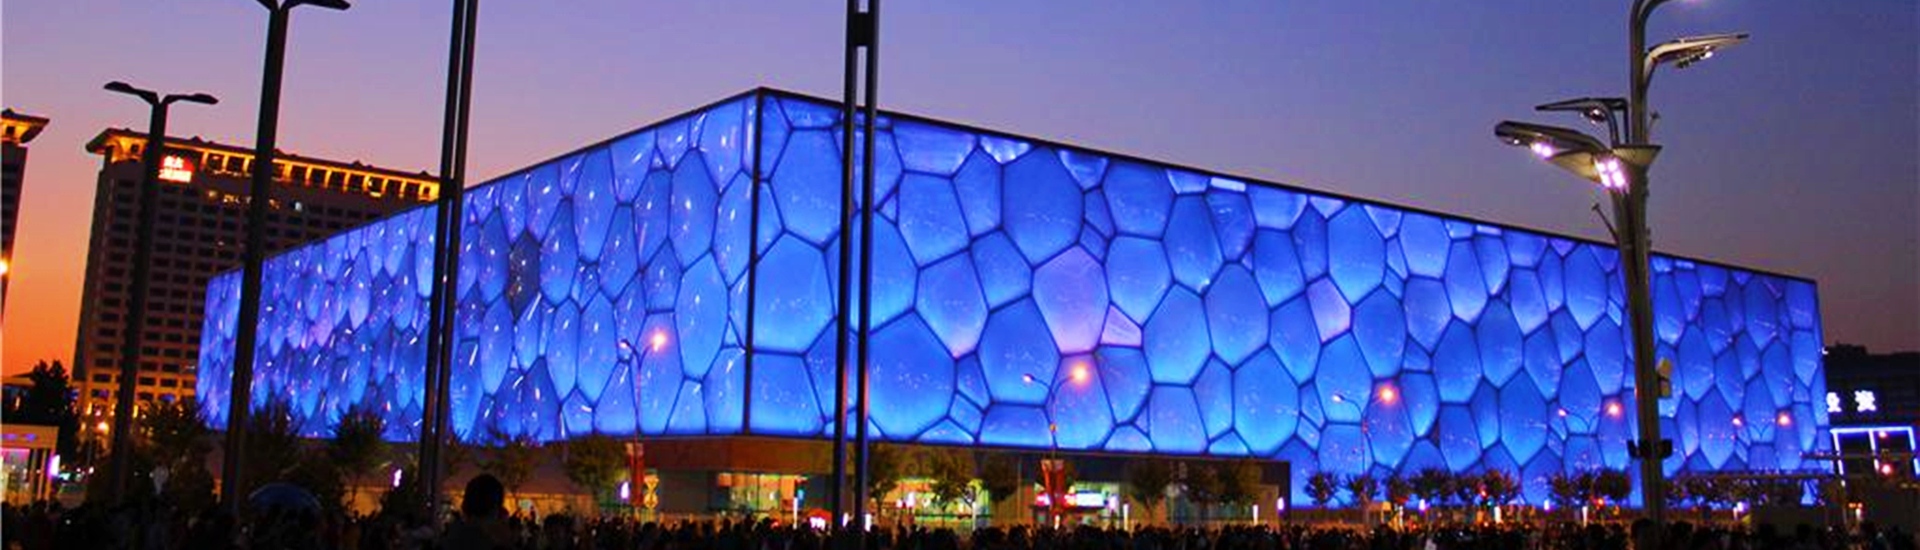 Beijing National Aquatics Center - Facts, Uses, and Night Scenery